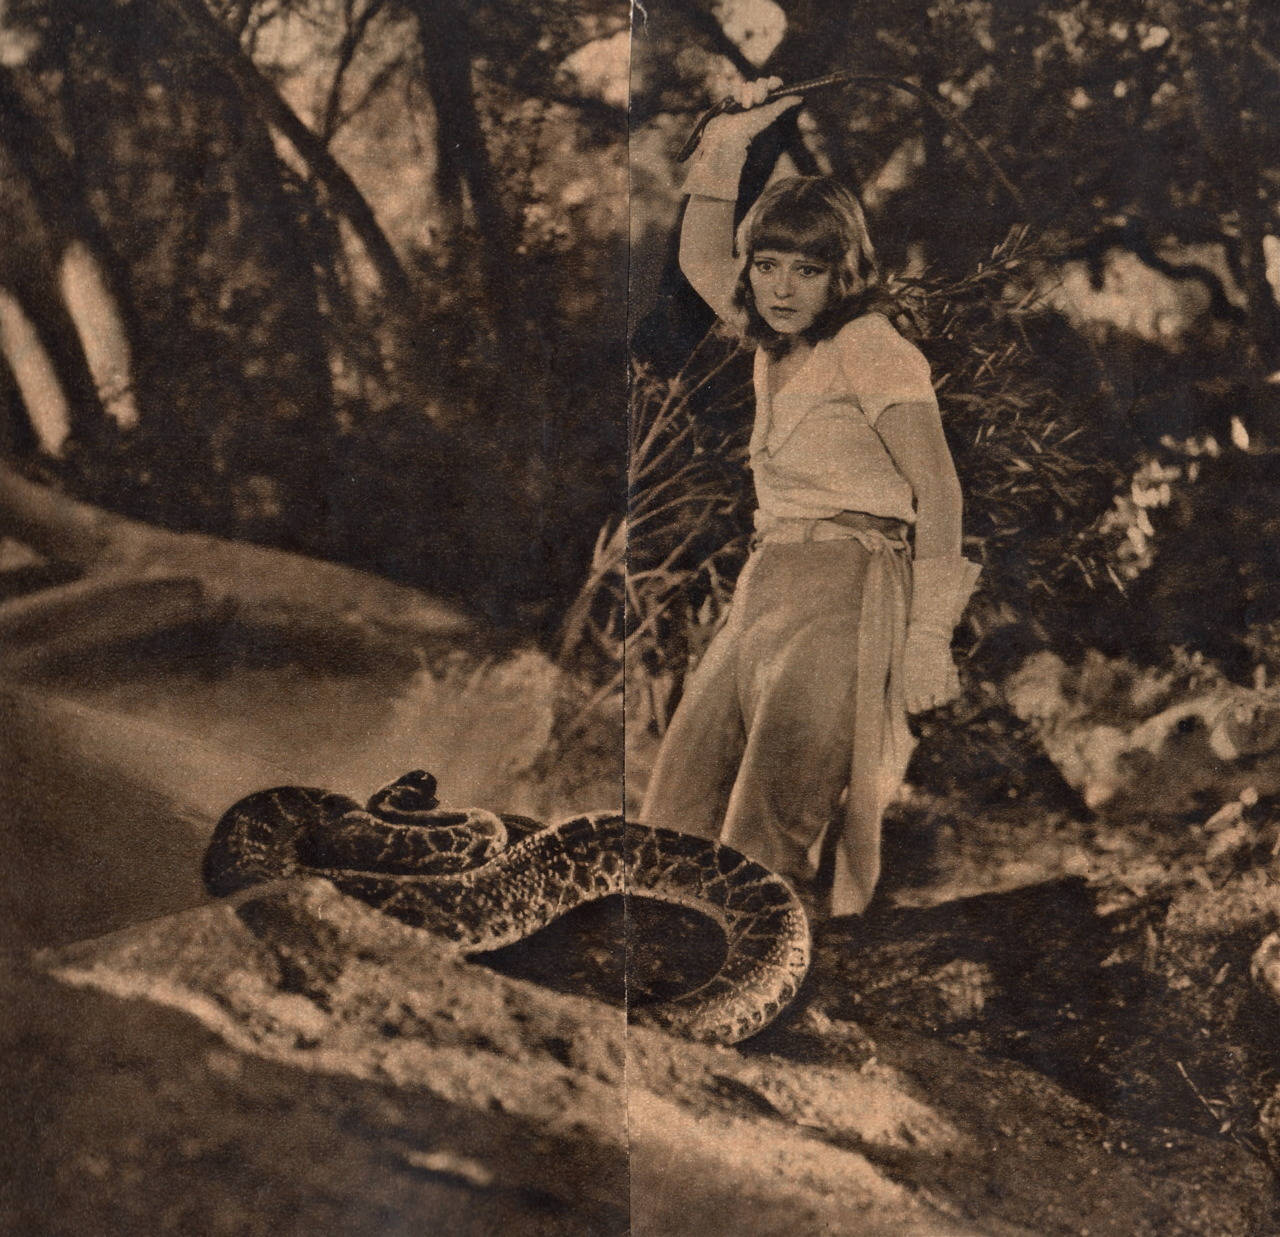 Clara Bow Enthralling With A Giant Snake Background